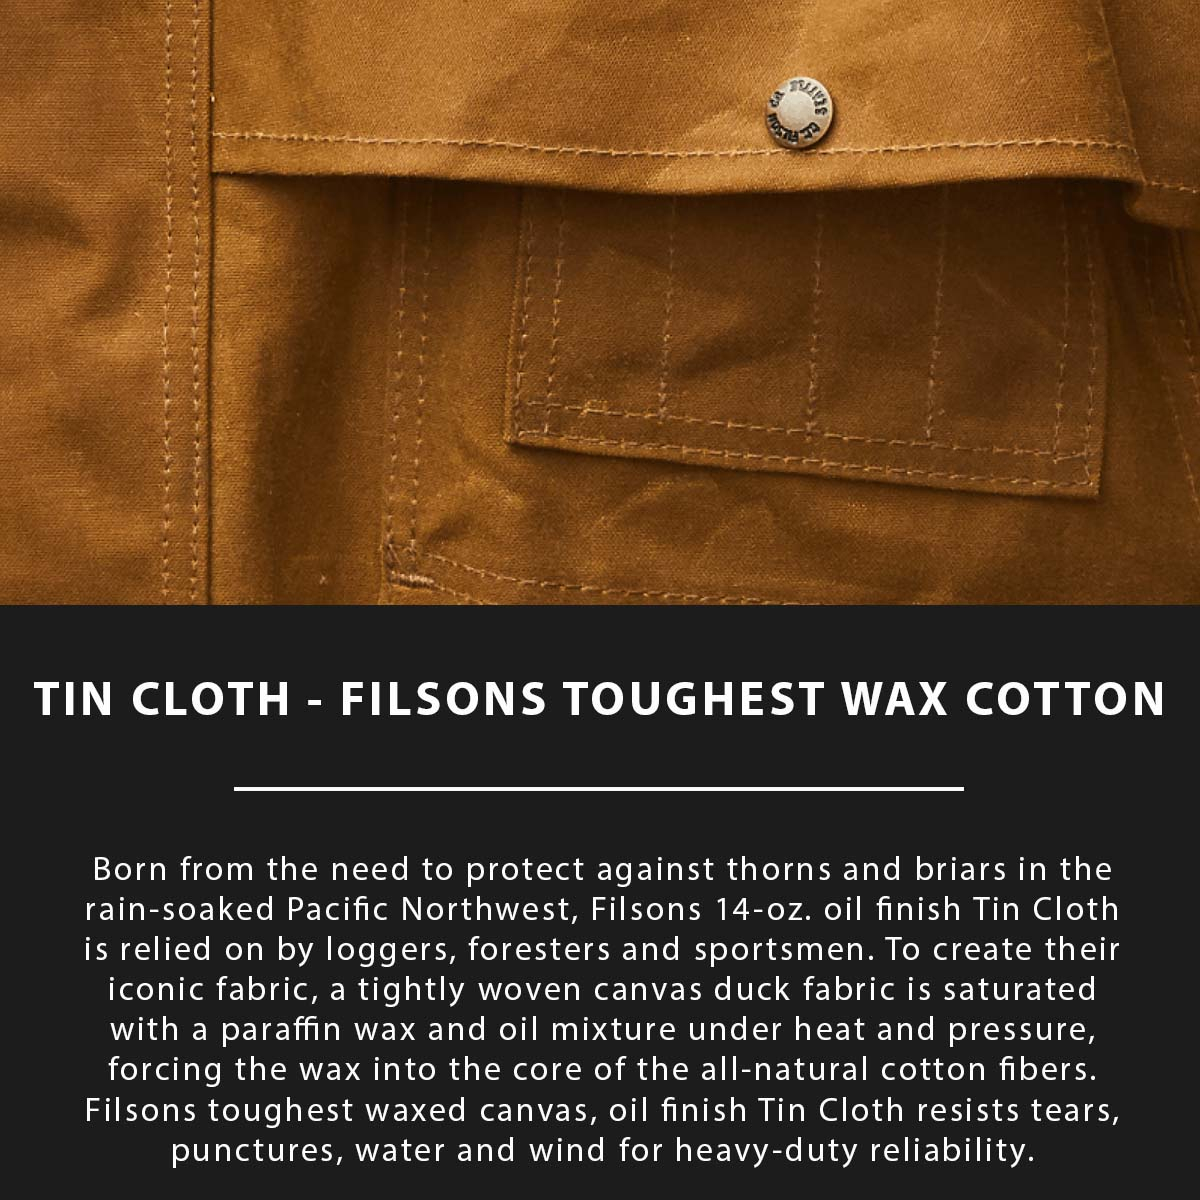 Filson Lined Tin Cloth Cruiser Jacket Dark Tan, made of the legendary super strong, lightweight, and oil impregnated 14-oz. Tin Cloth canvas